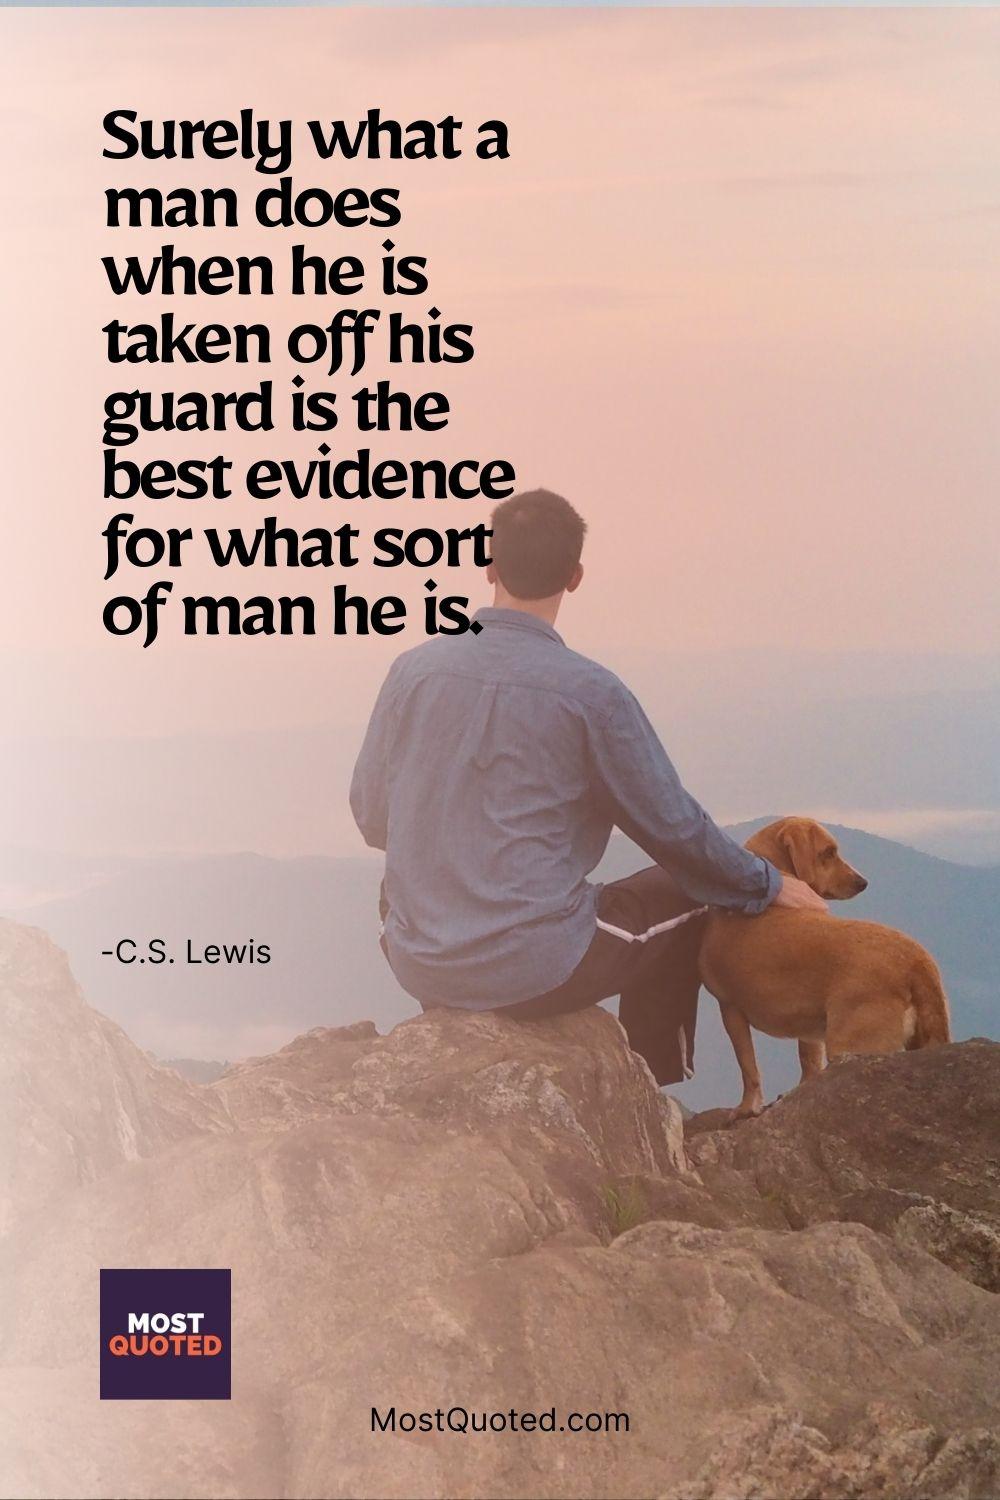 Surely what a man does when he is taken off his guard is the best evidence for what sort of man he is. - C.S. Lewis